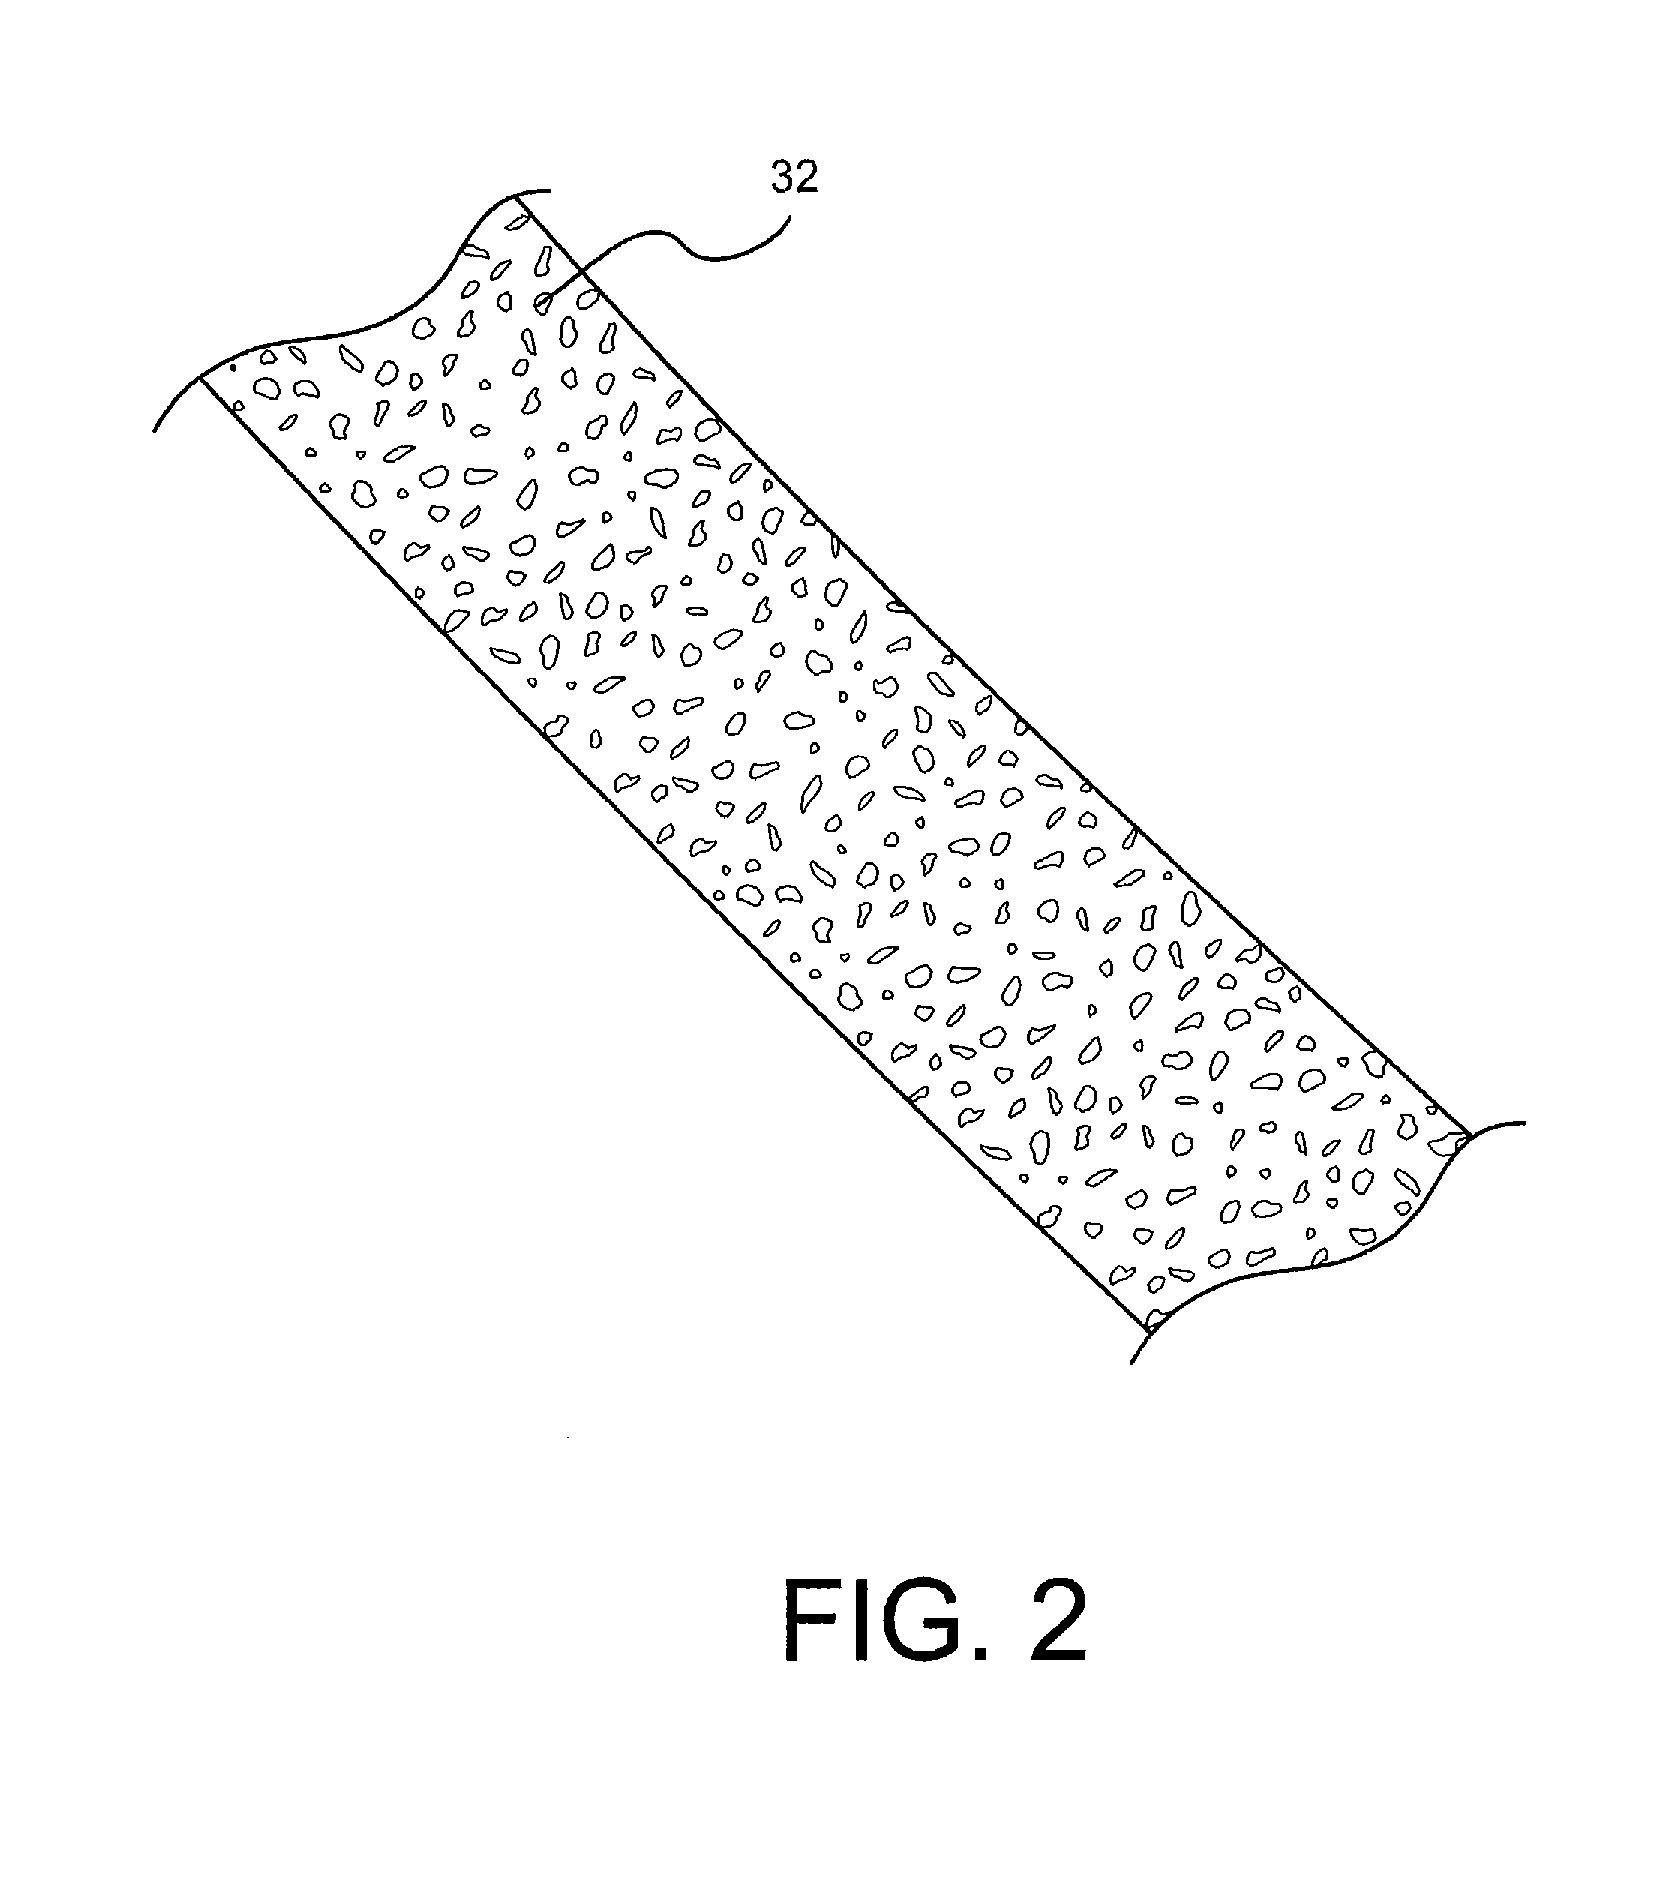 Method and Device for Air Conditioning with Humidity Control